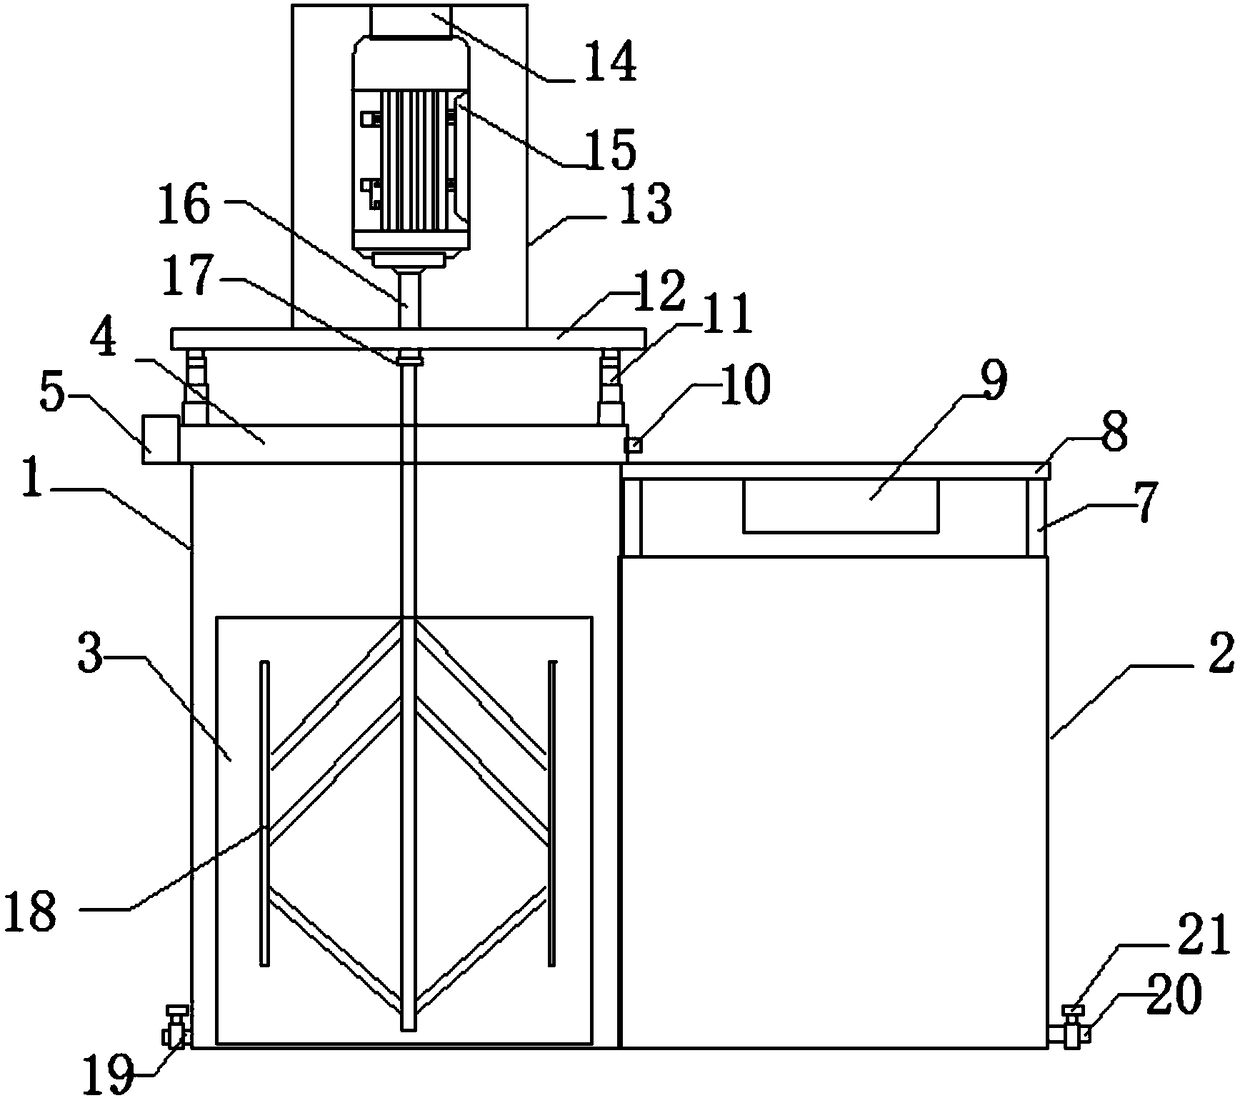 Simple carbon removing device for silicon carbide micropowder